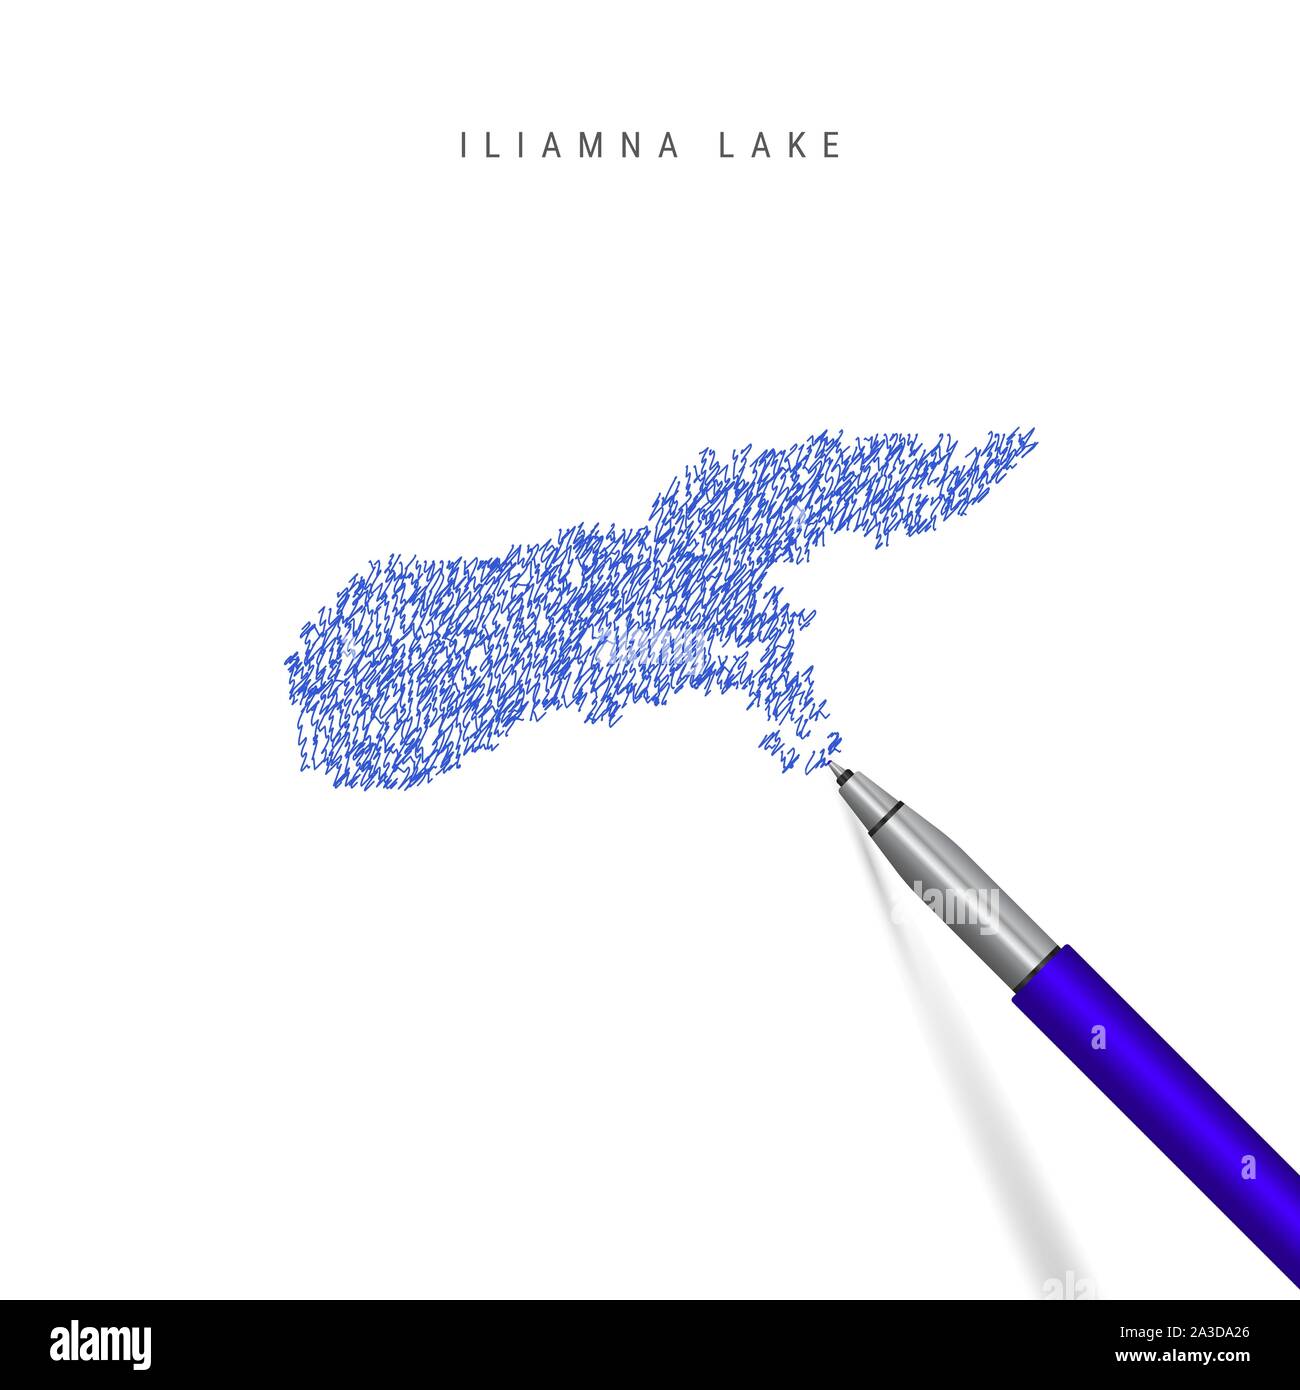 Iliamna Lake sketch scribble map isolated on white background. Hand drawn vector map of Iliamna Lake. Realistic 3D ballpoint pen or roller pen illustr Stock Vector